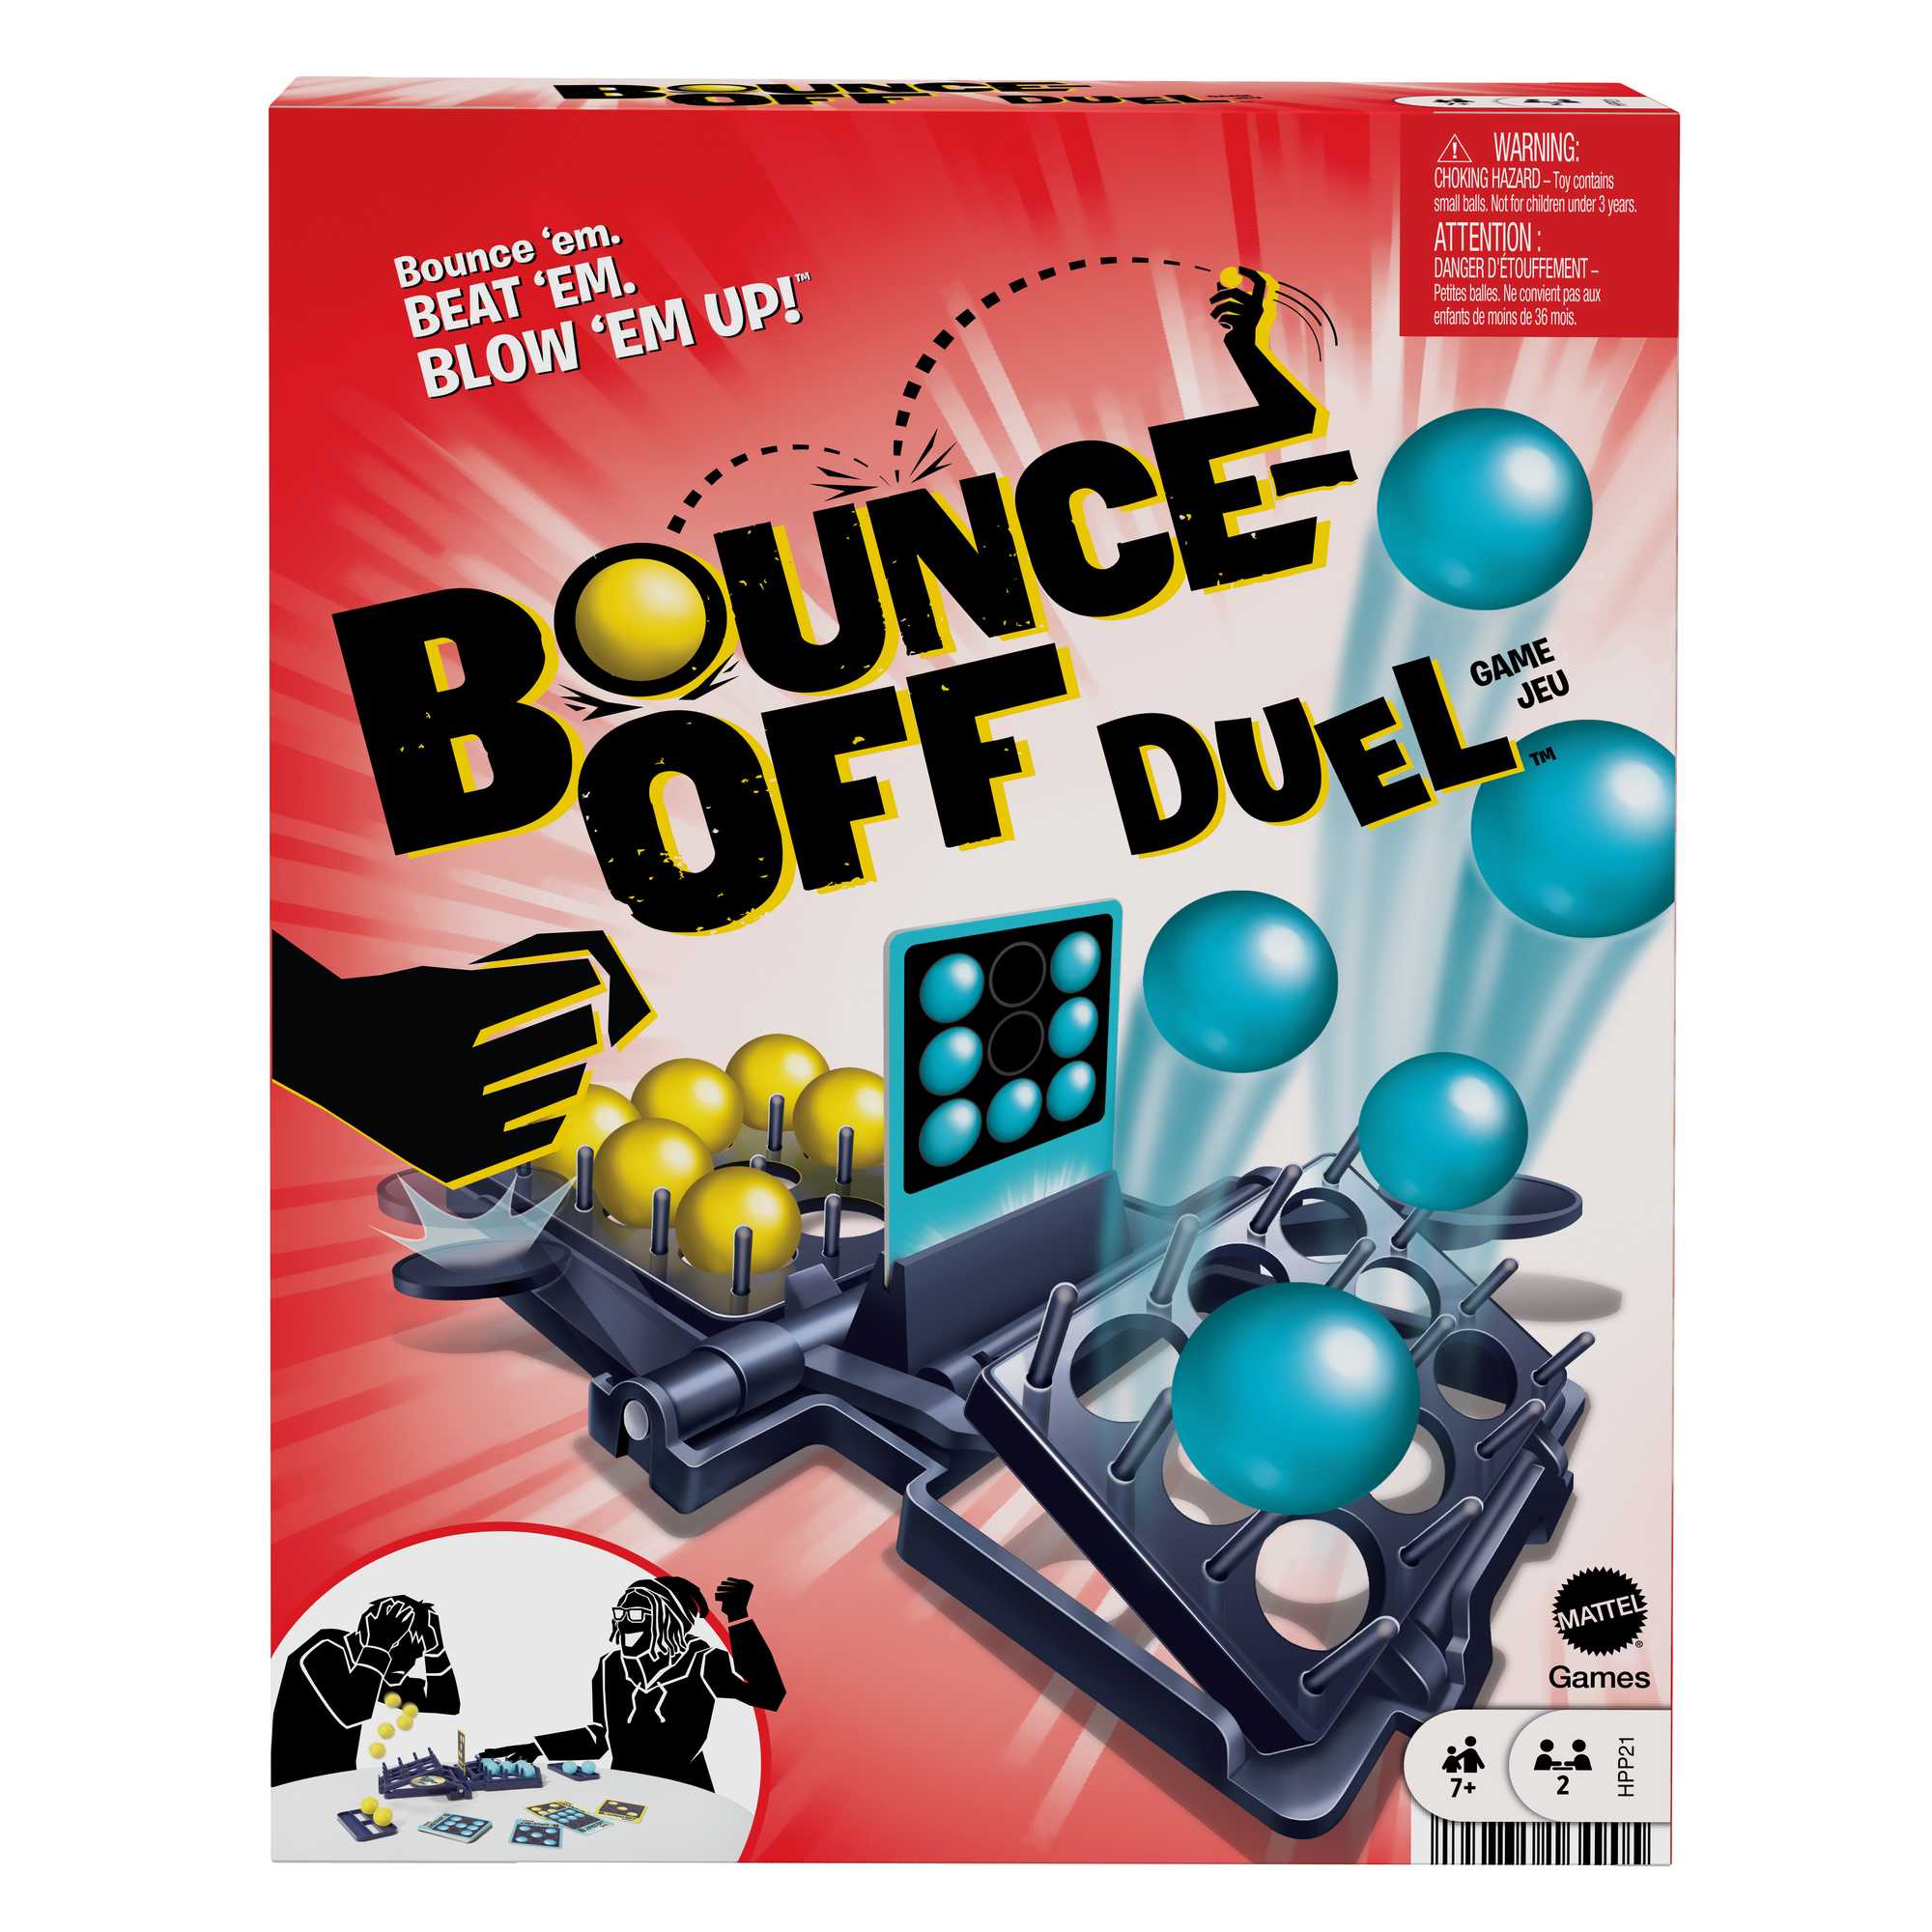  Mattel Games Bounce-Off Duel 2-Player Game for Kids